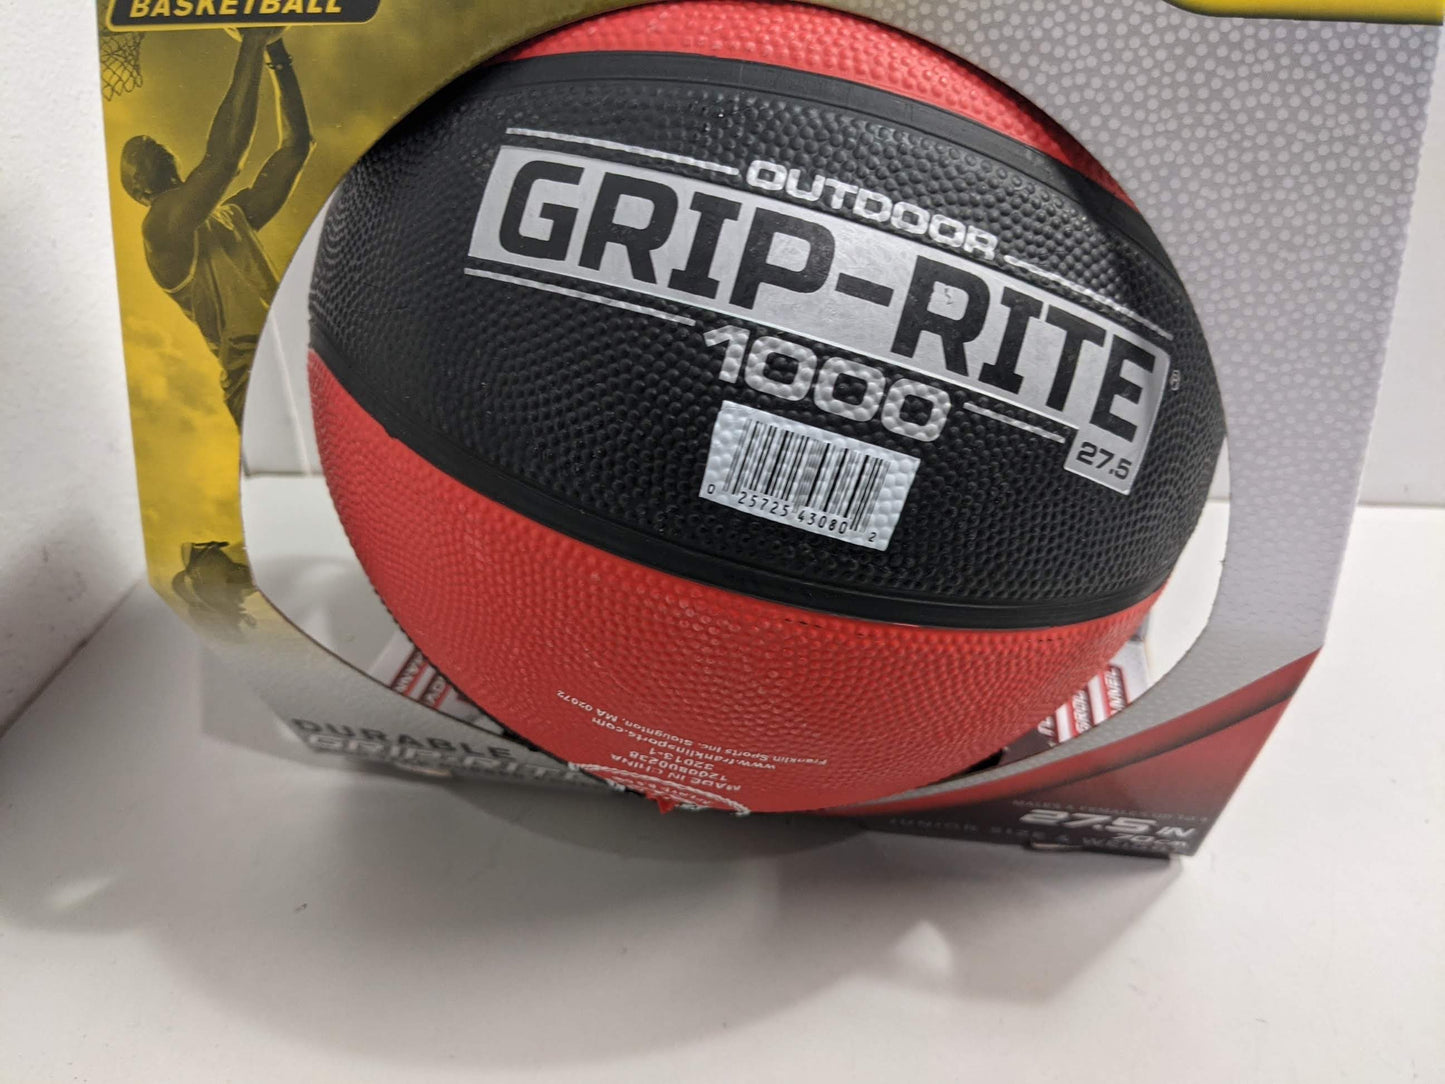 Franklin Outdoor Grip-Rite 1000 Basketball, Size 27.5, Red